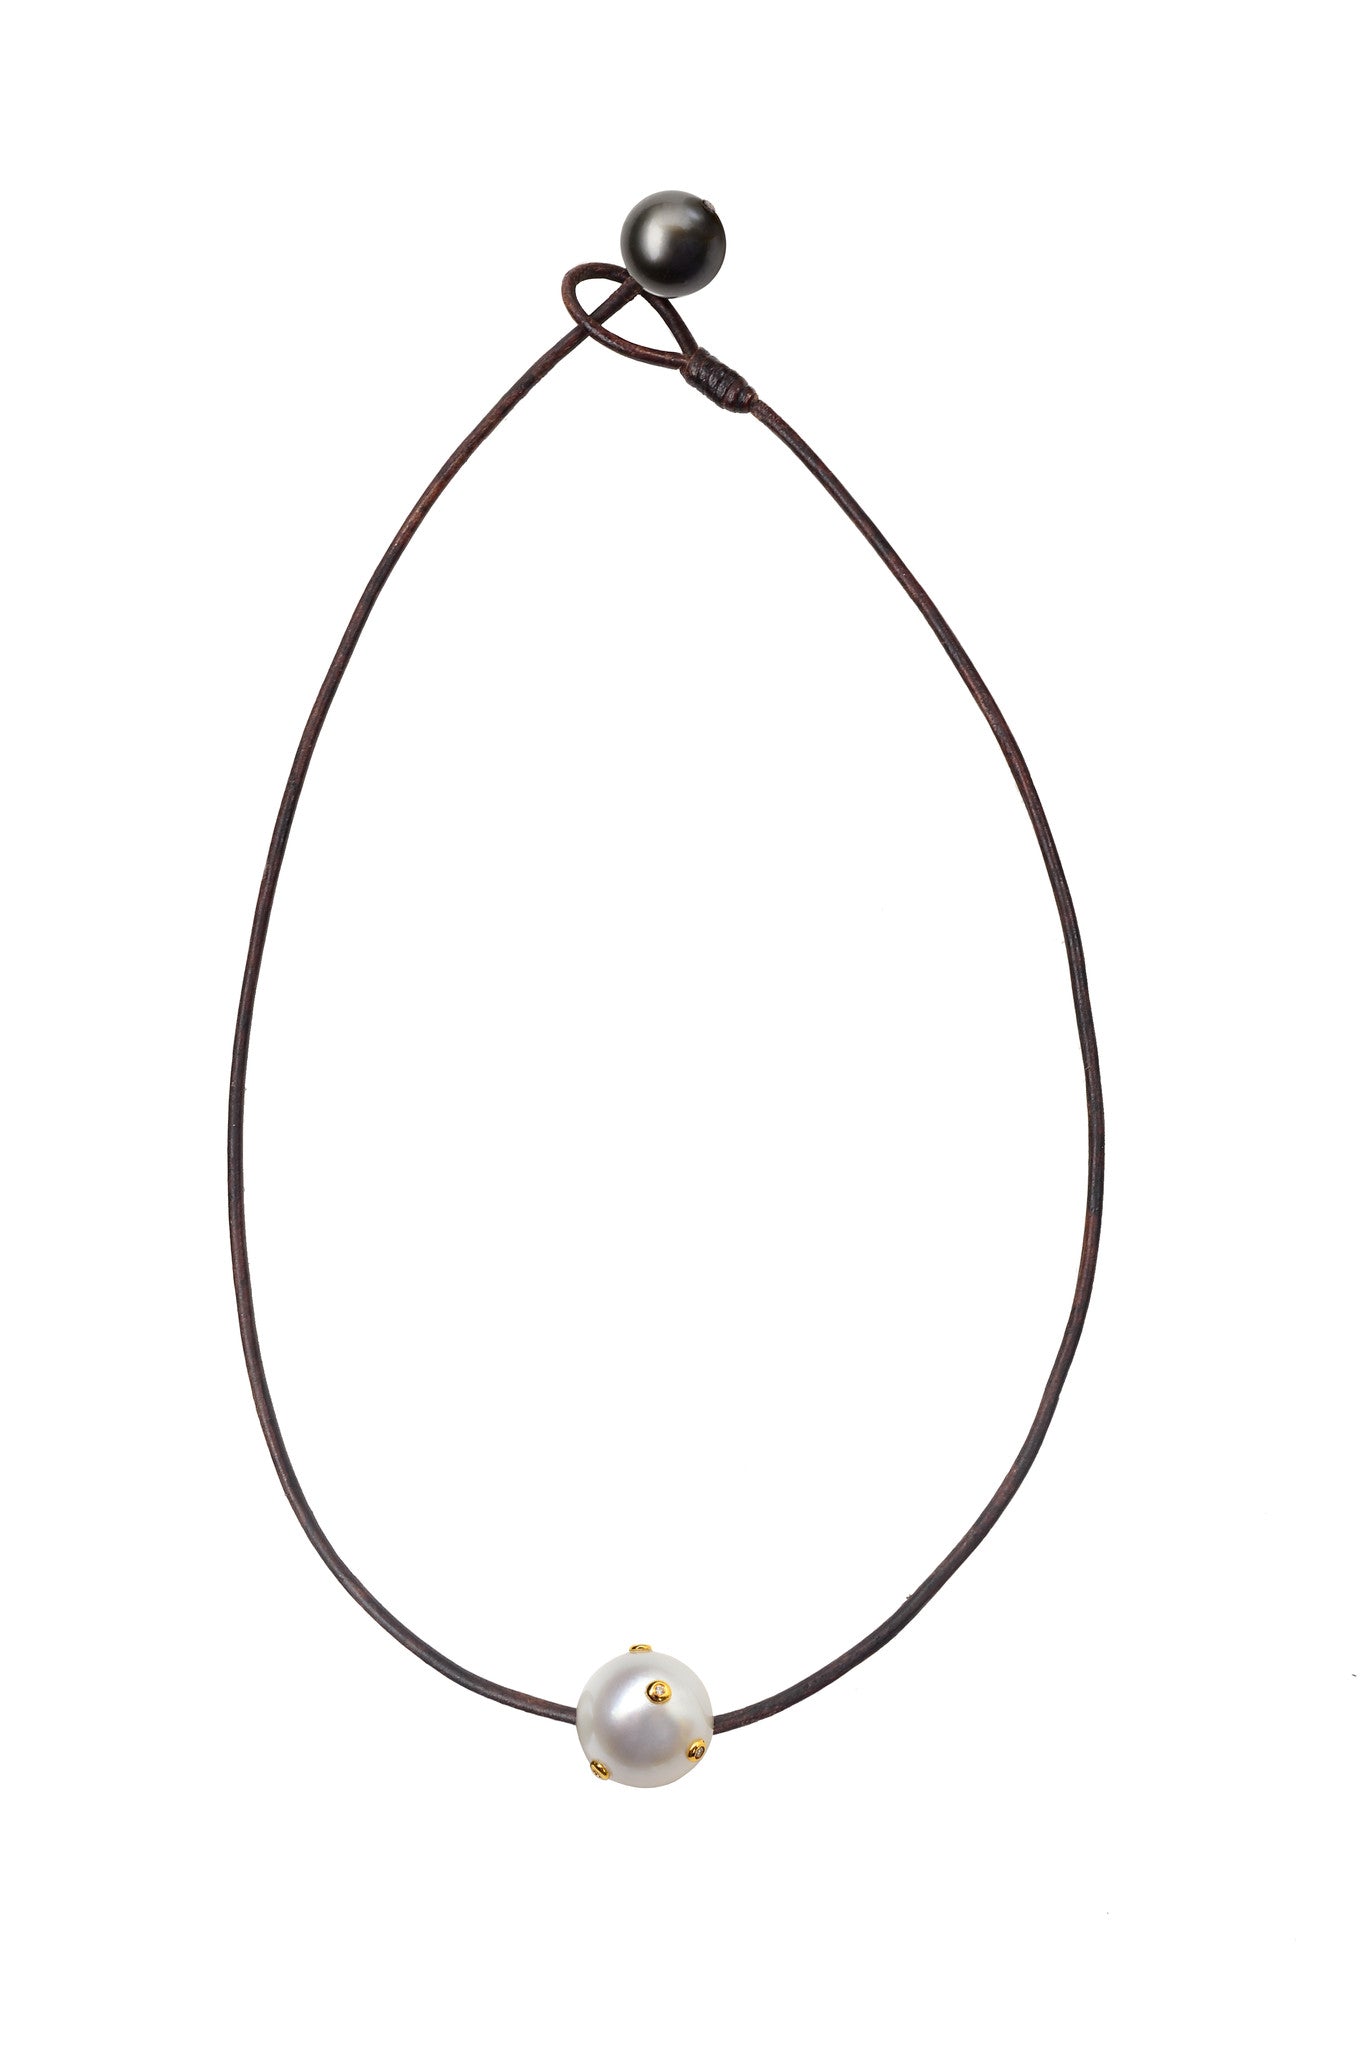 Camelot South Sea Necklace, Tahitian and South Sea - Hottest Designer Pearl and Leather Jewelry | VINCENT PEACH
